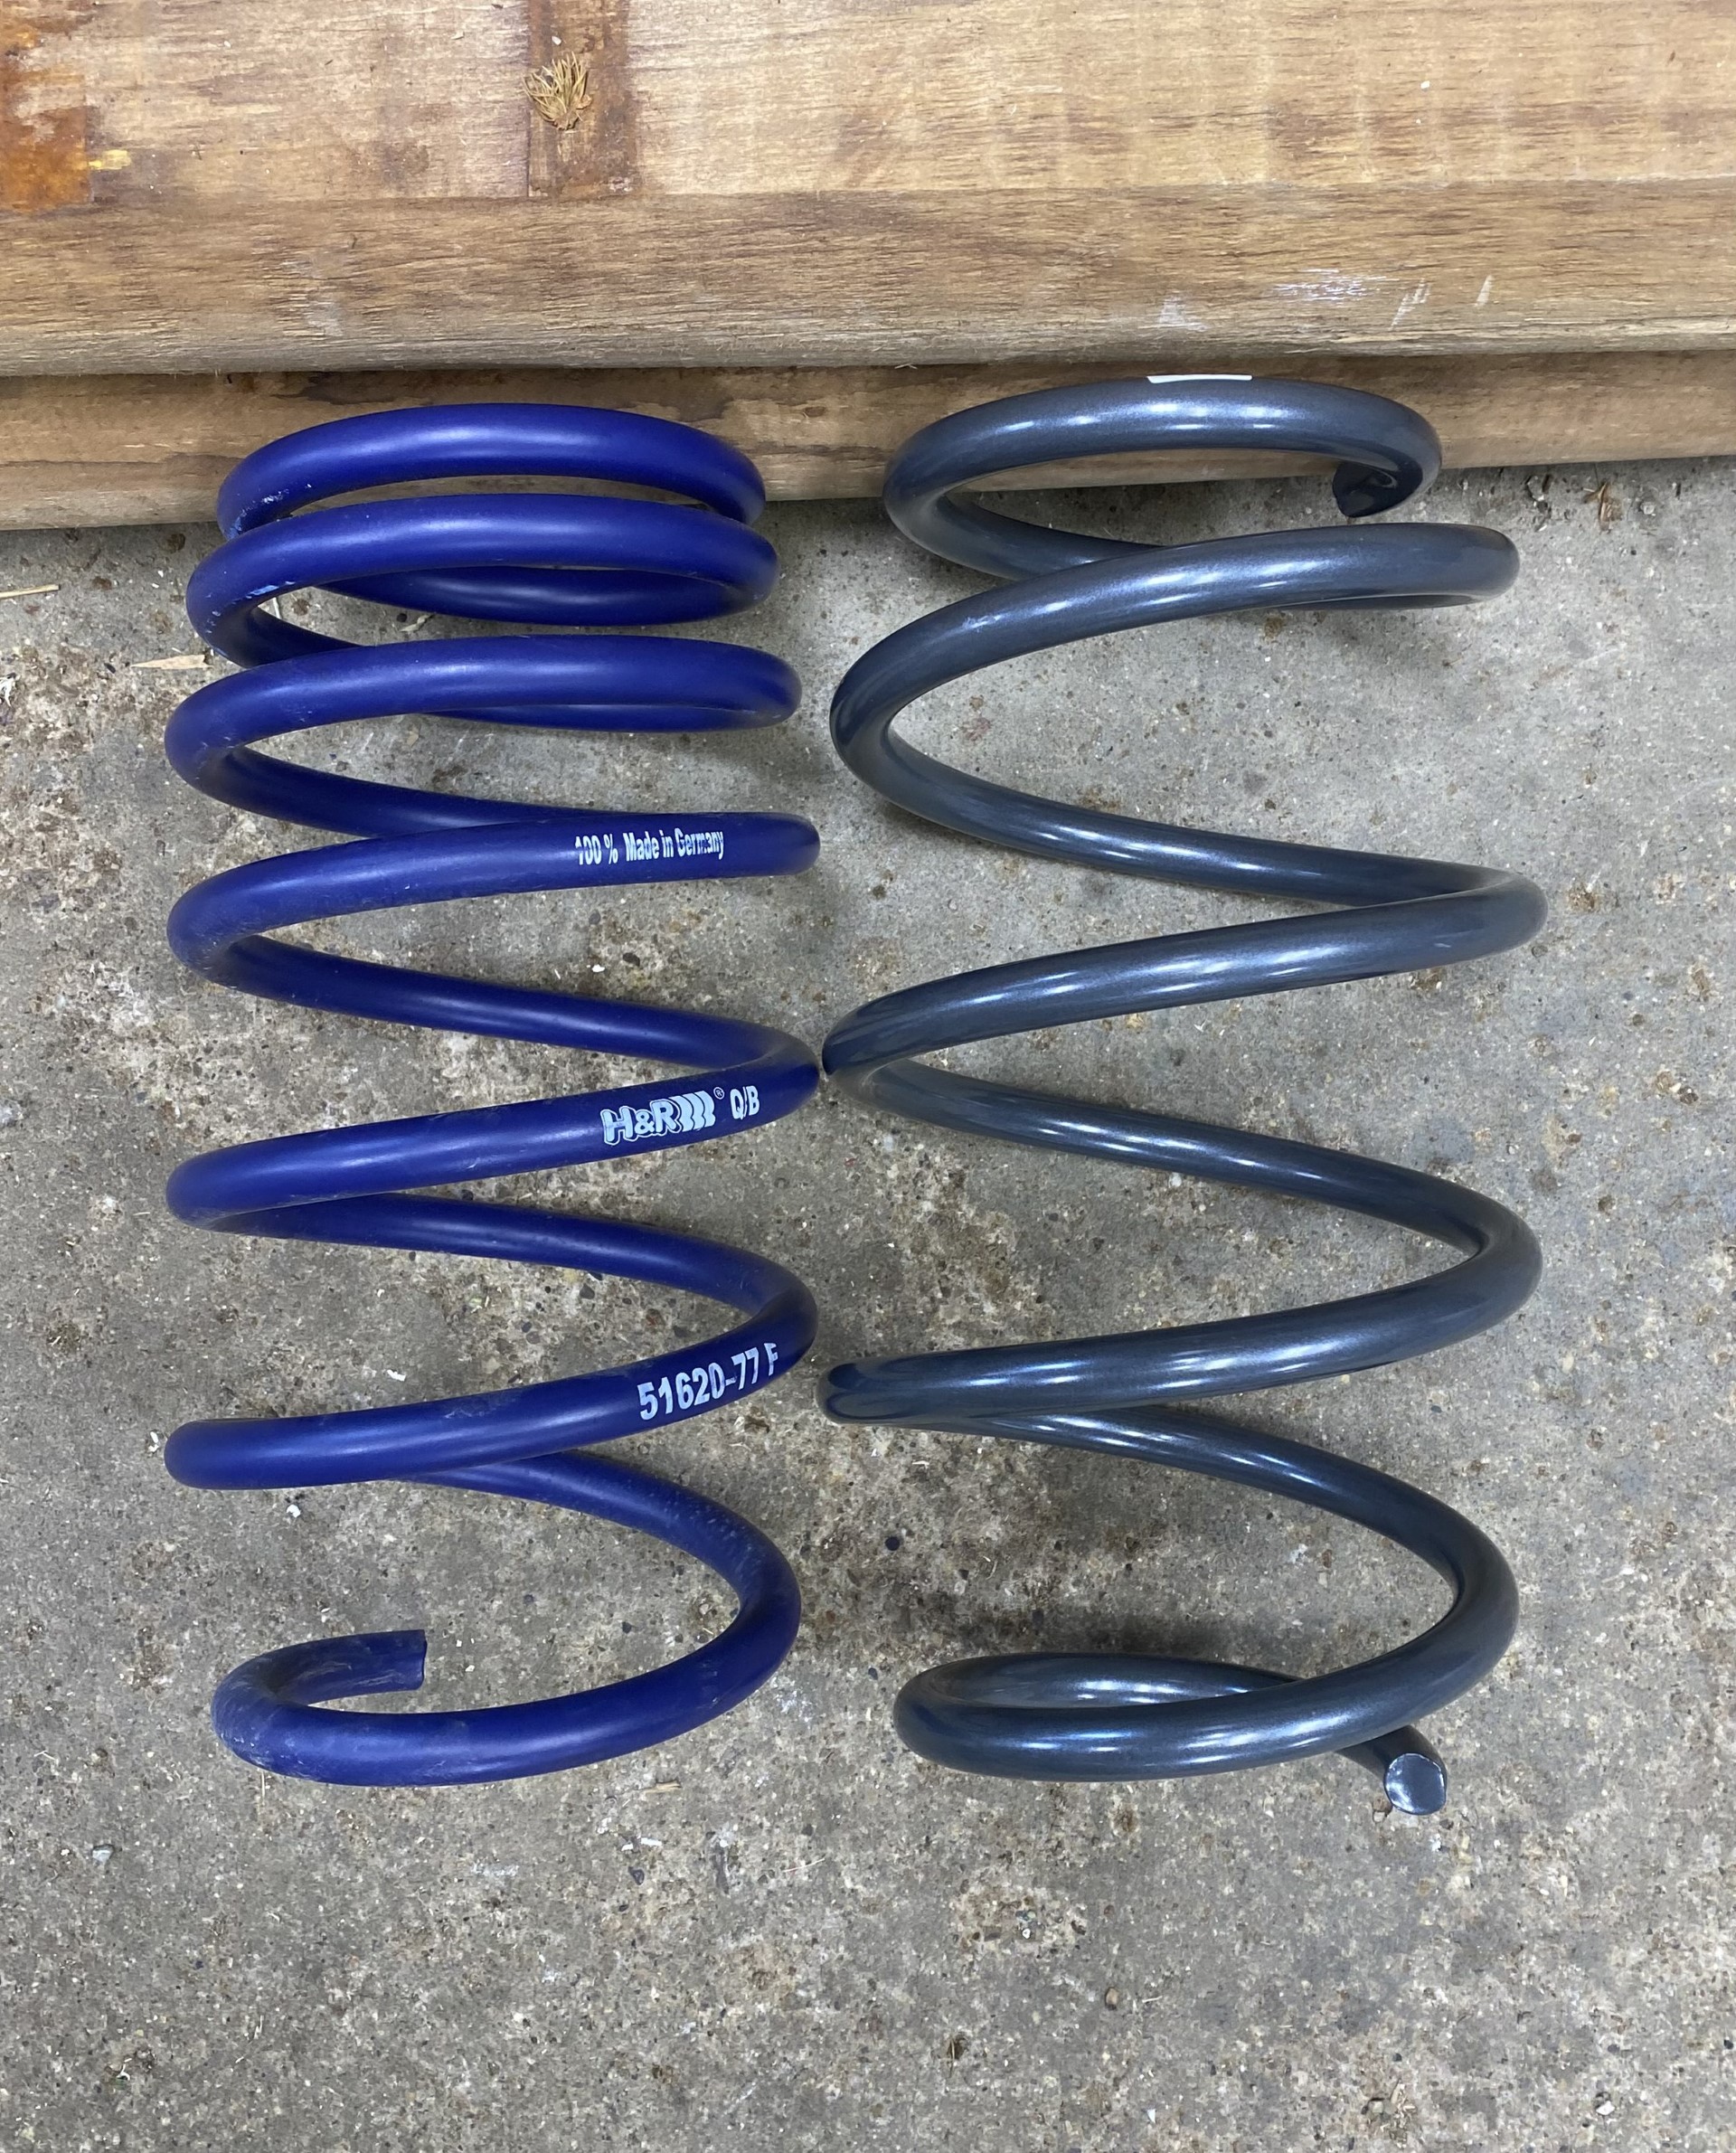 Ford Maverick Lowered with Good-Win Racing lowering springs (+ comparison to H&R springs) Mav 5